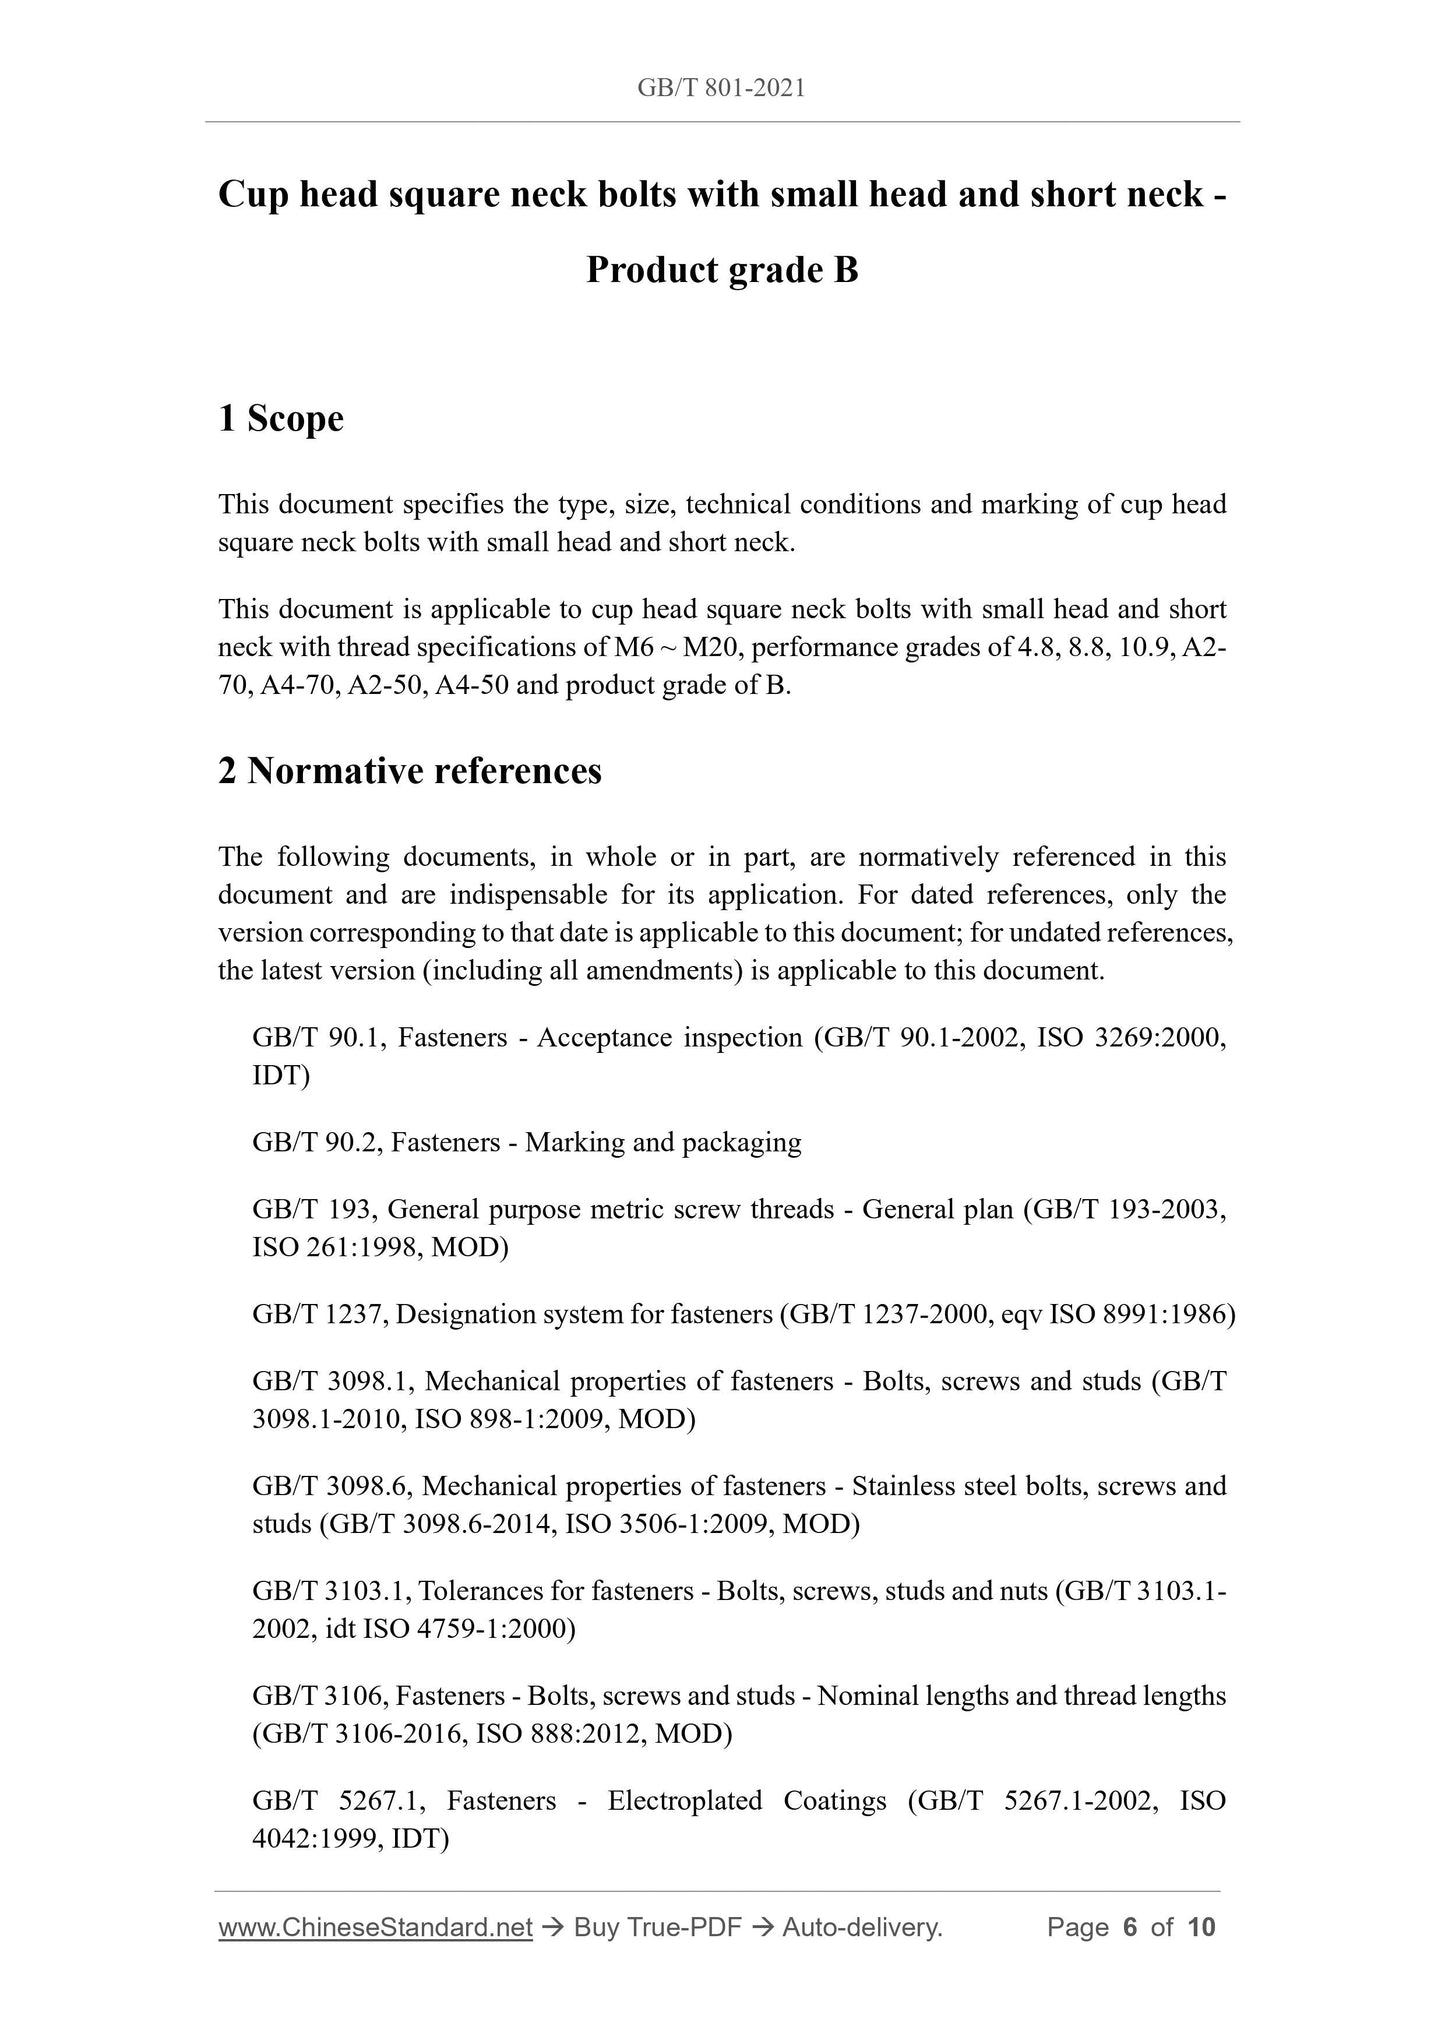 GB/T 801-2021 Page 4